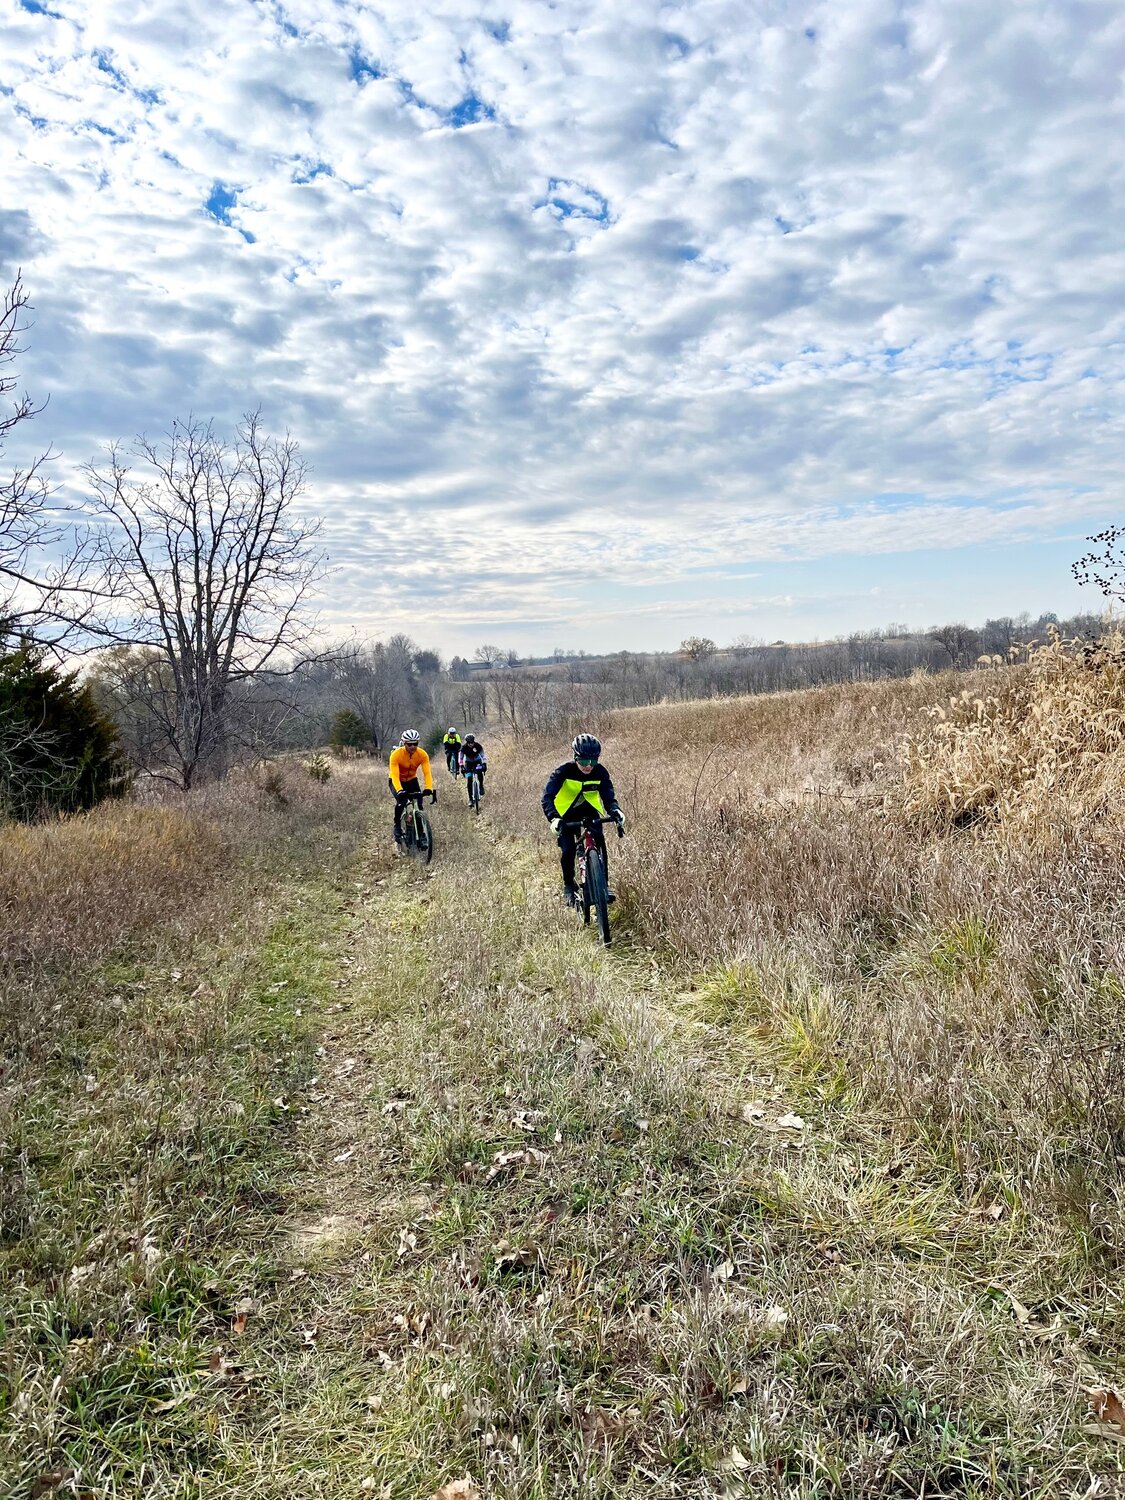 The race route offers some off-roading and views for miles, like the portion here near Buchanan Avenue and Angle Road.